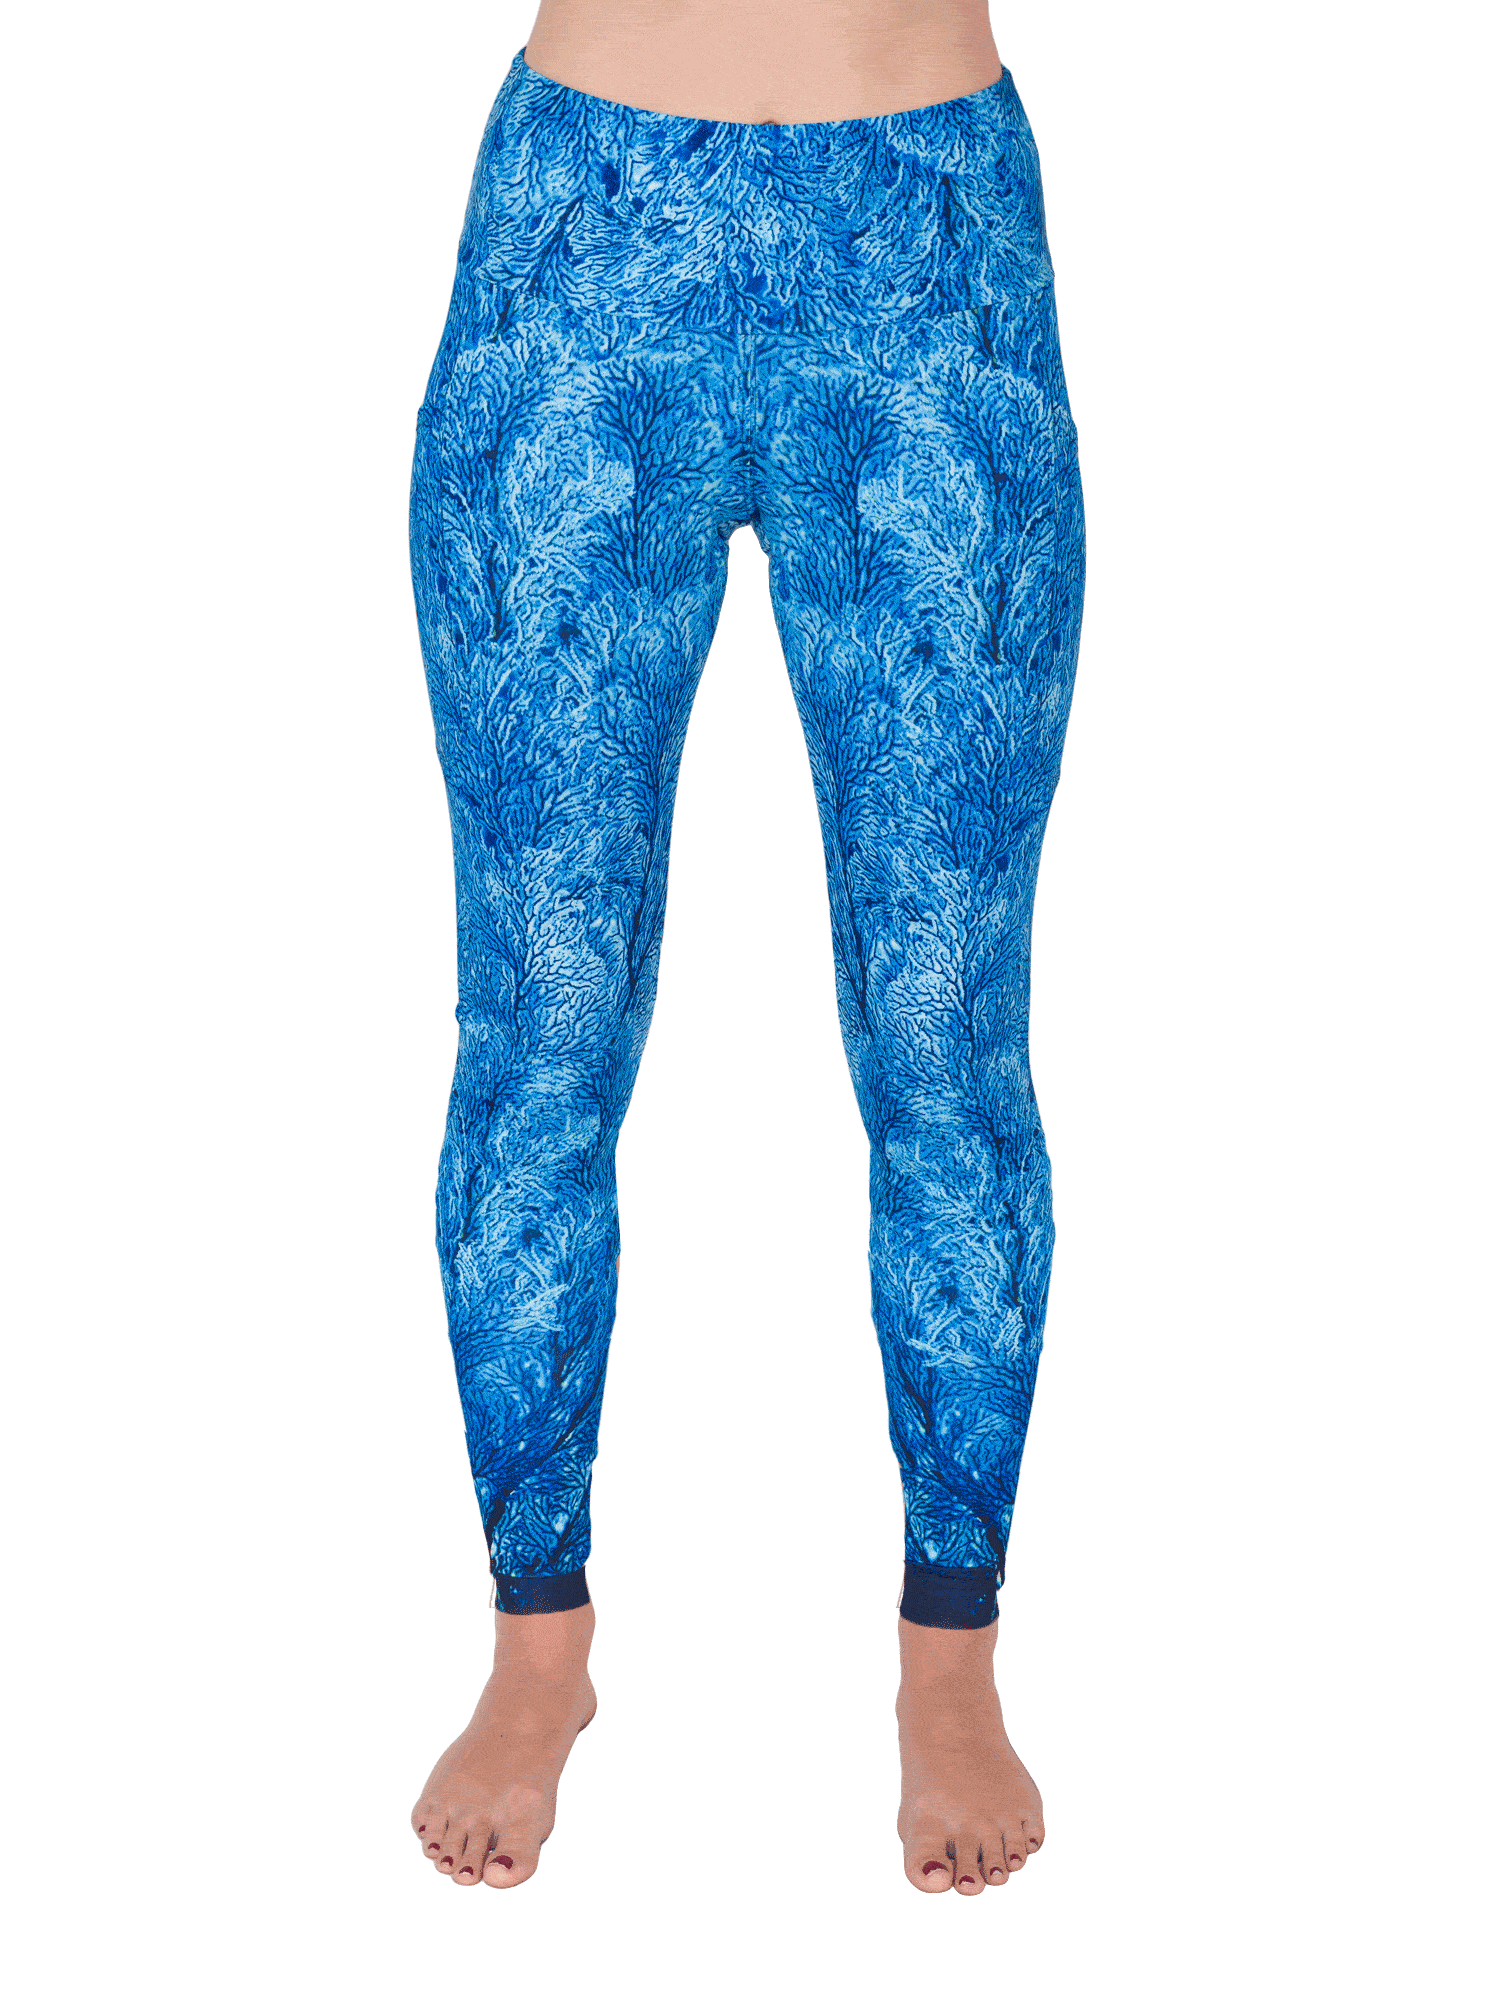 [AirFlawless] No-Fold Y-Zone Free Leggings Coral